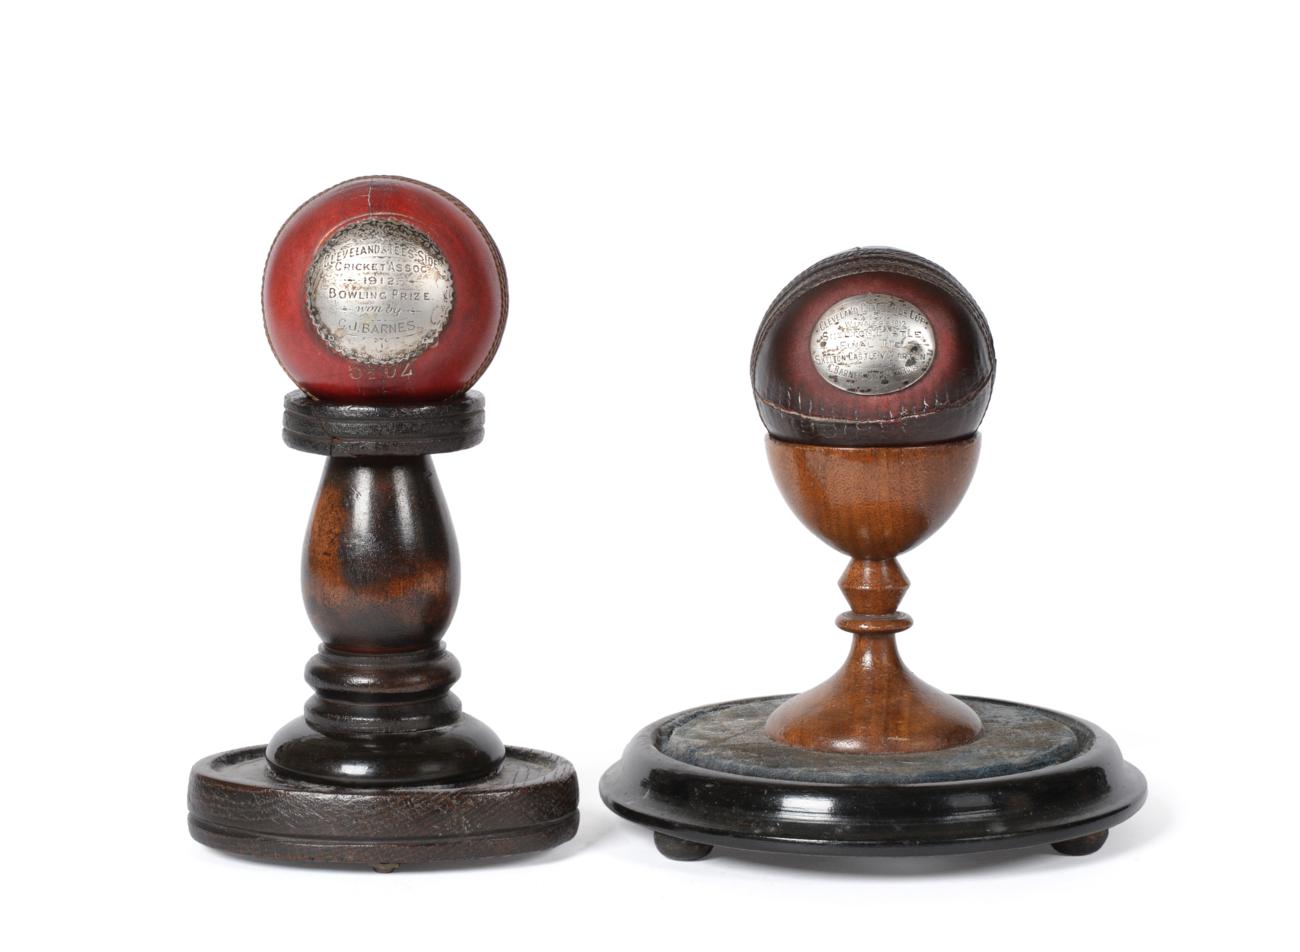 Lot 7 - Cleveland & Tees-Side Cricket Association 1912 Bowling Prize won by C J Barnes, consisting of a...